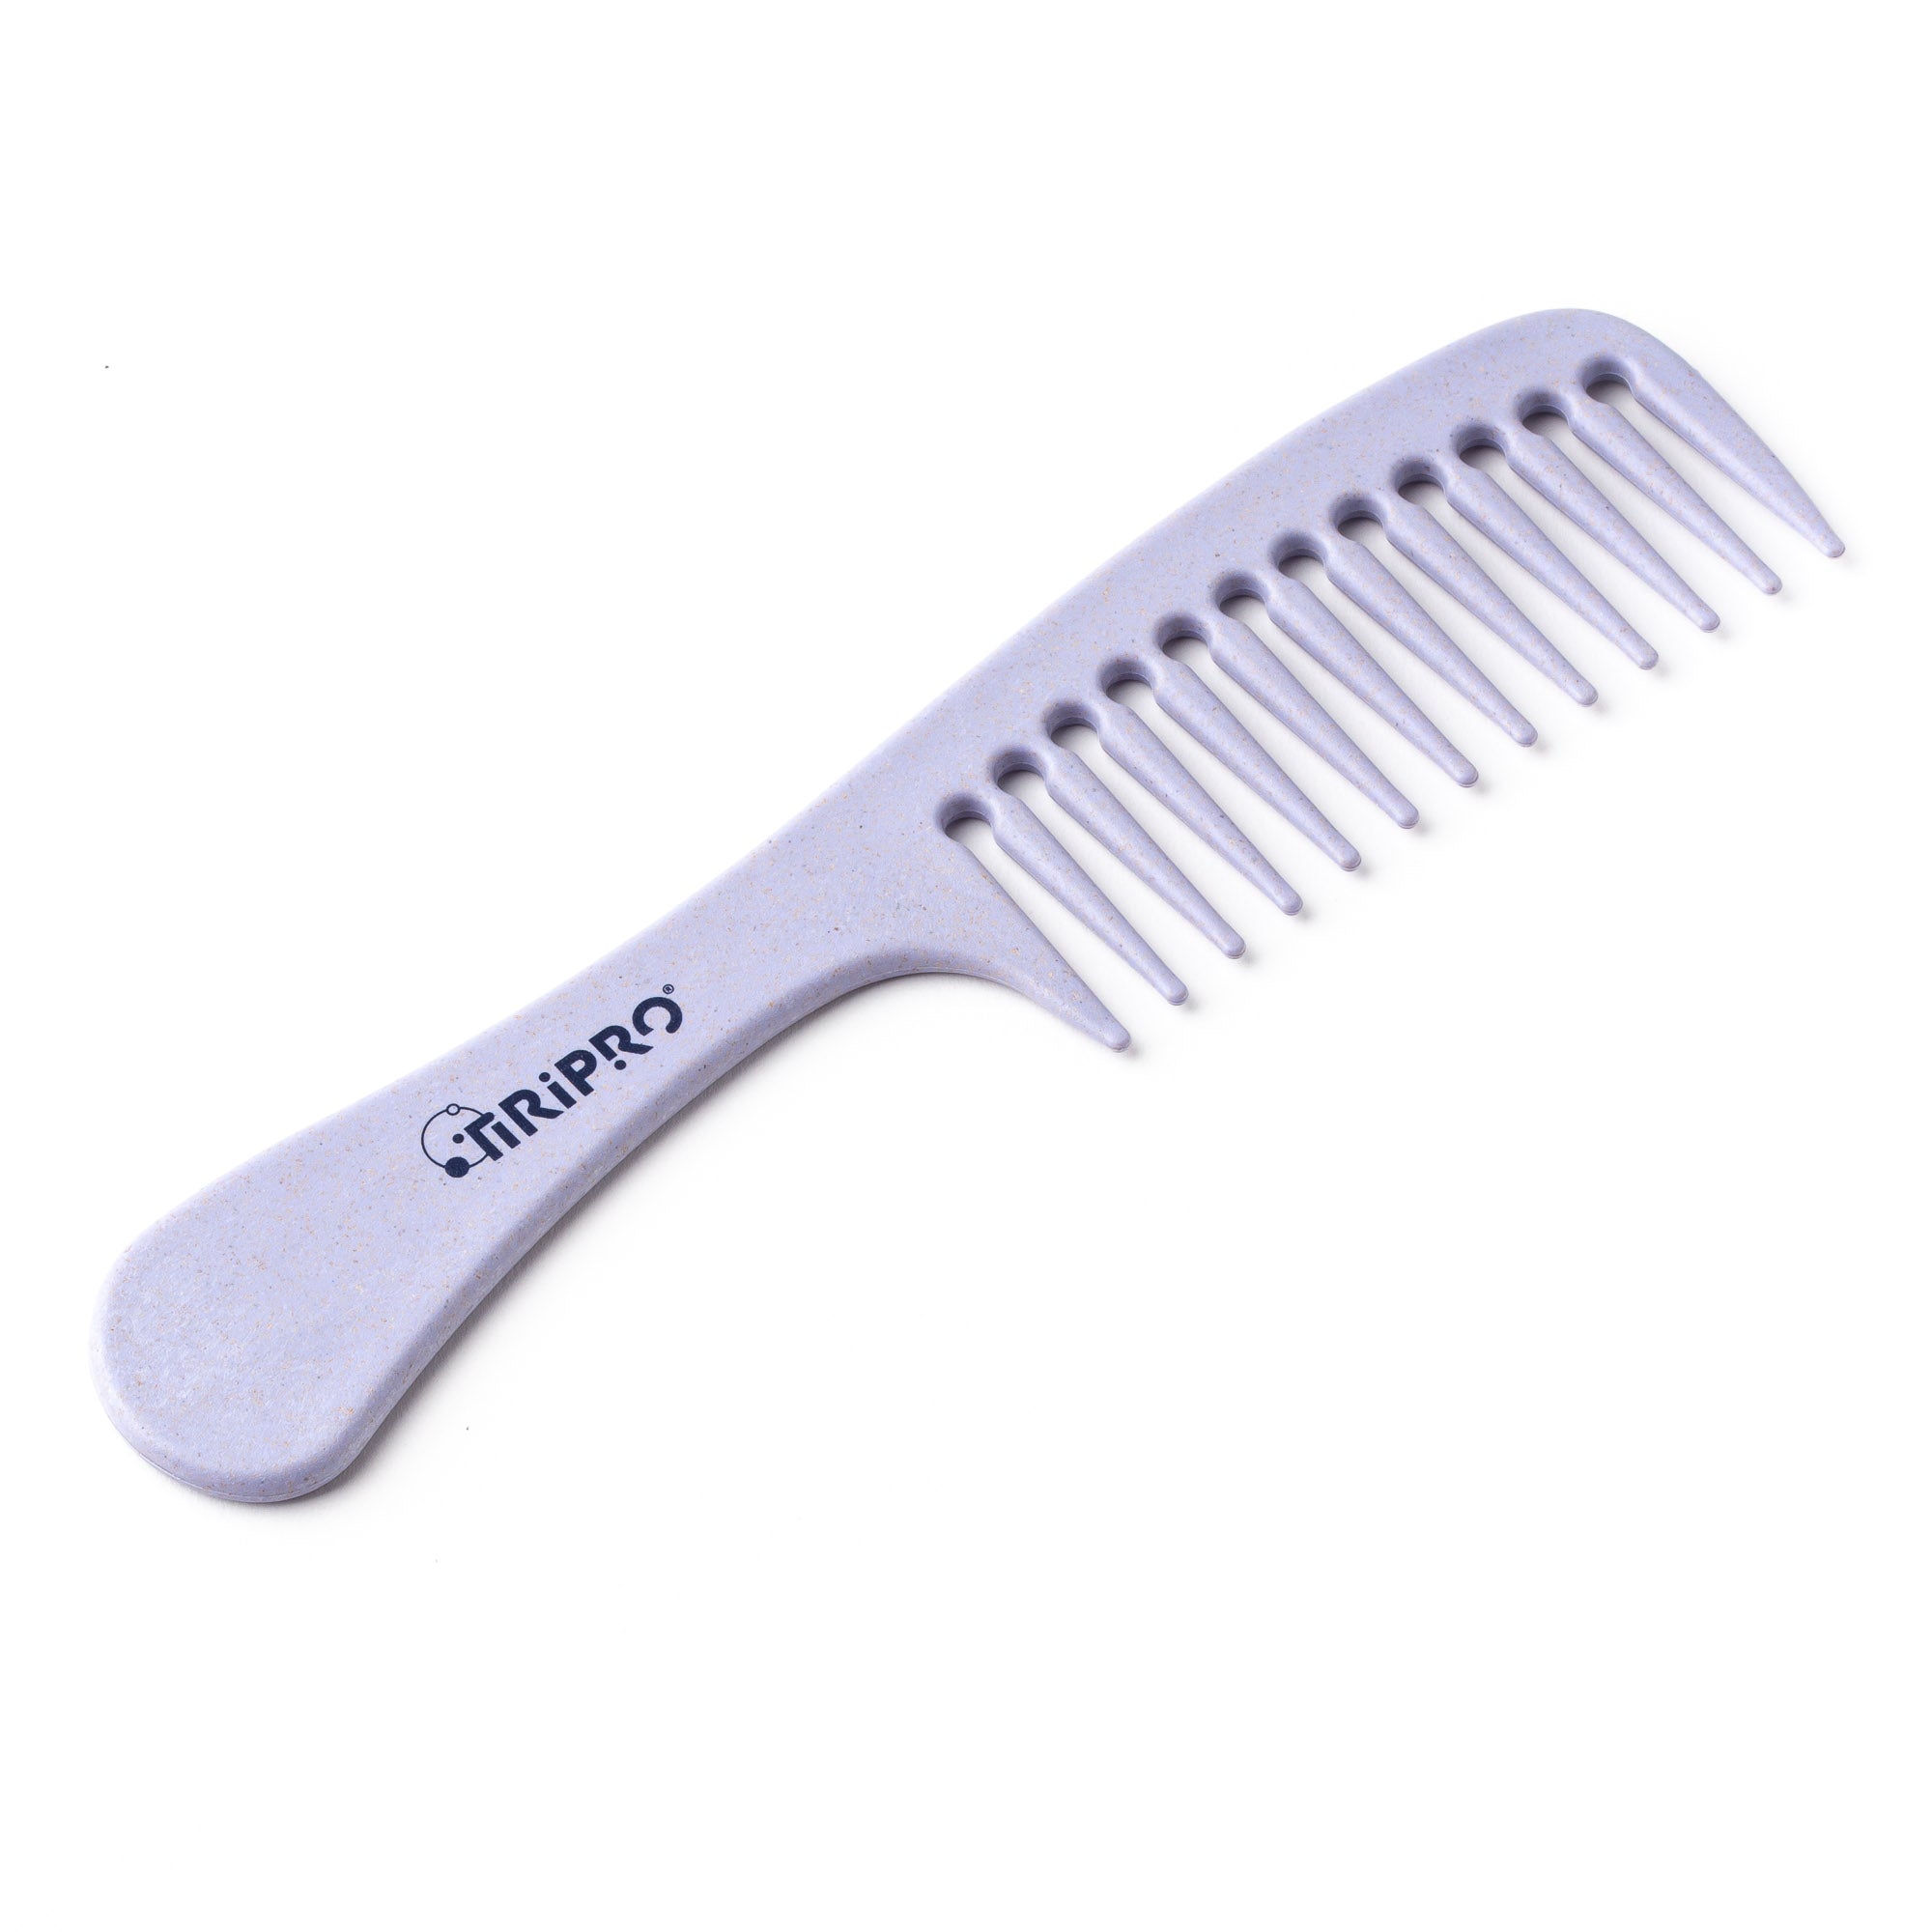 Eco-Friendly Wide Tooth Comb - Rice Hull (Gray)